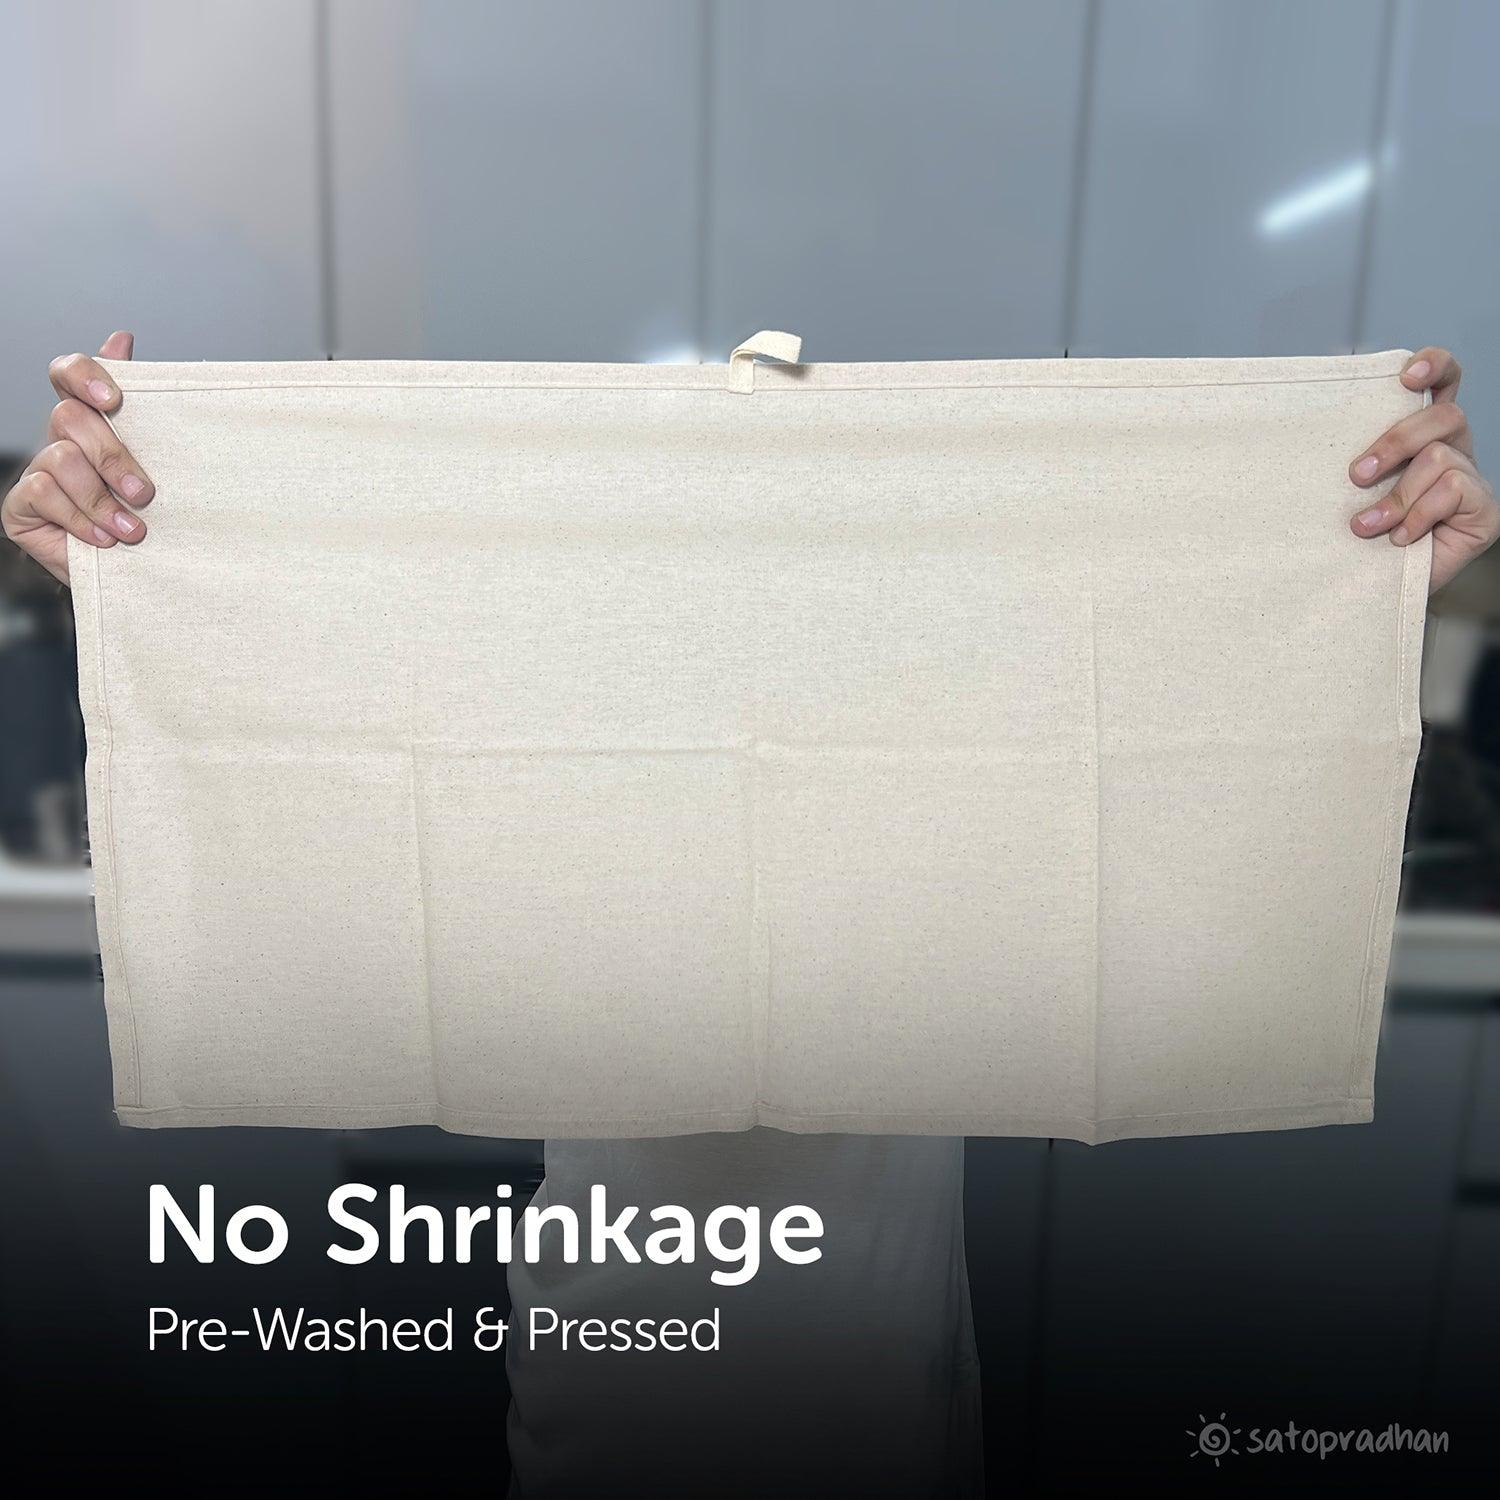 There is no issue of shrinkage and losing elasticity even after repeated washes